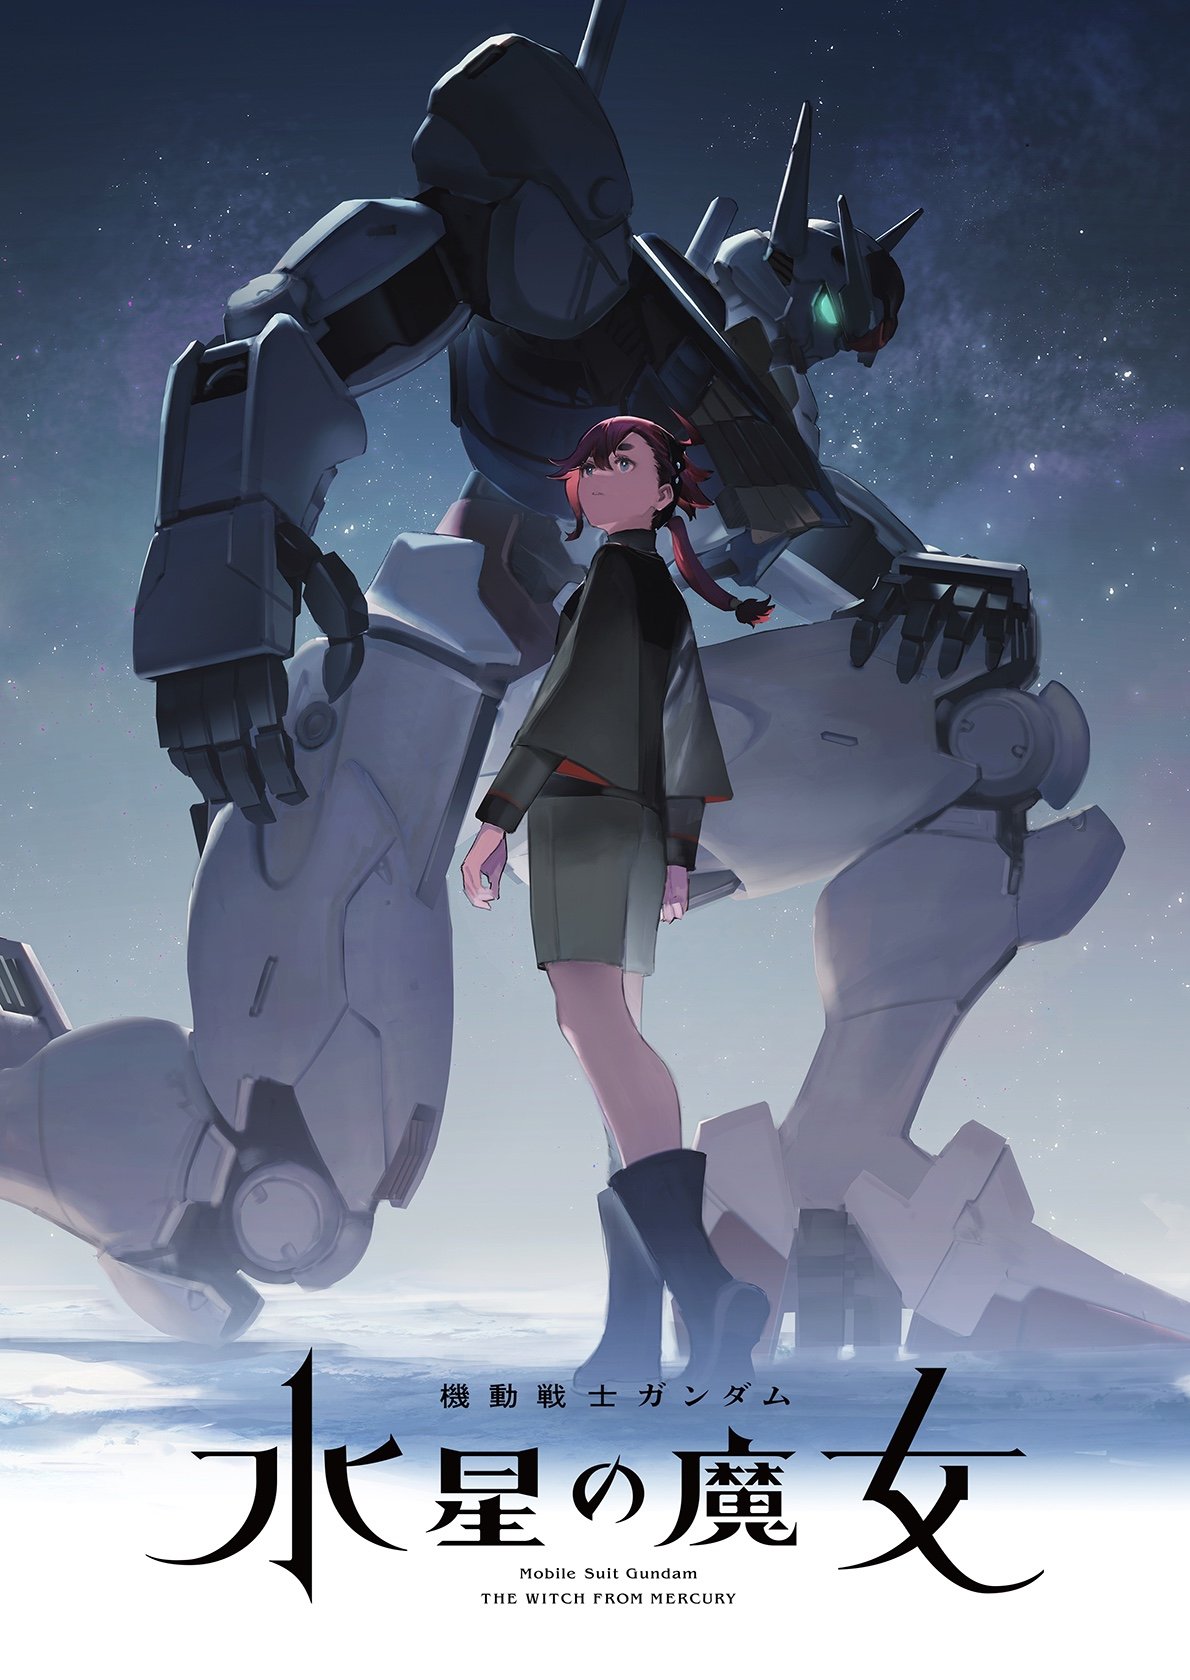 Mobile Suit Gundam The Witch from Mercury Season 2 Premieres on April 9   QooApp News